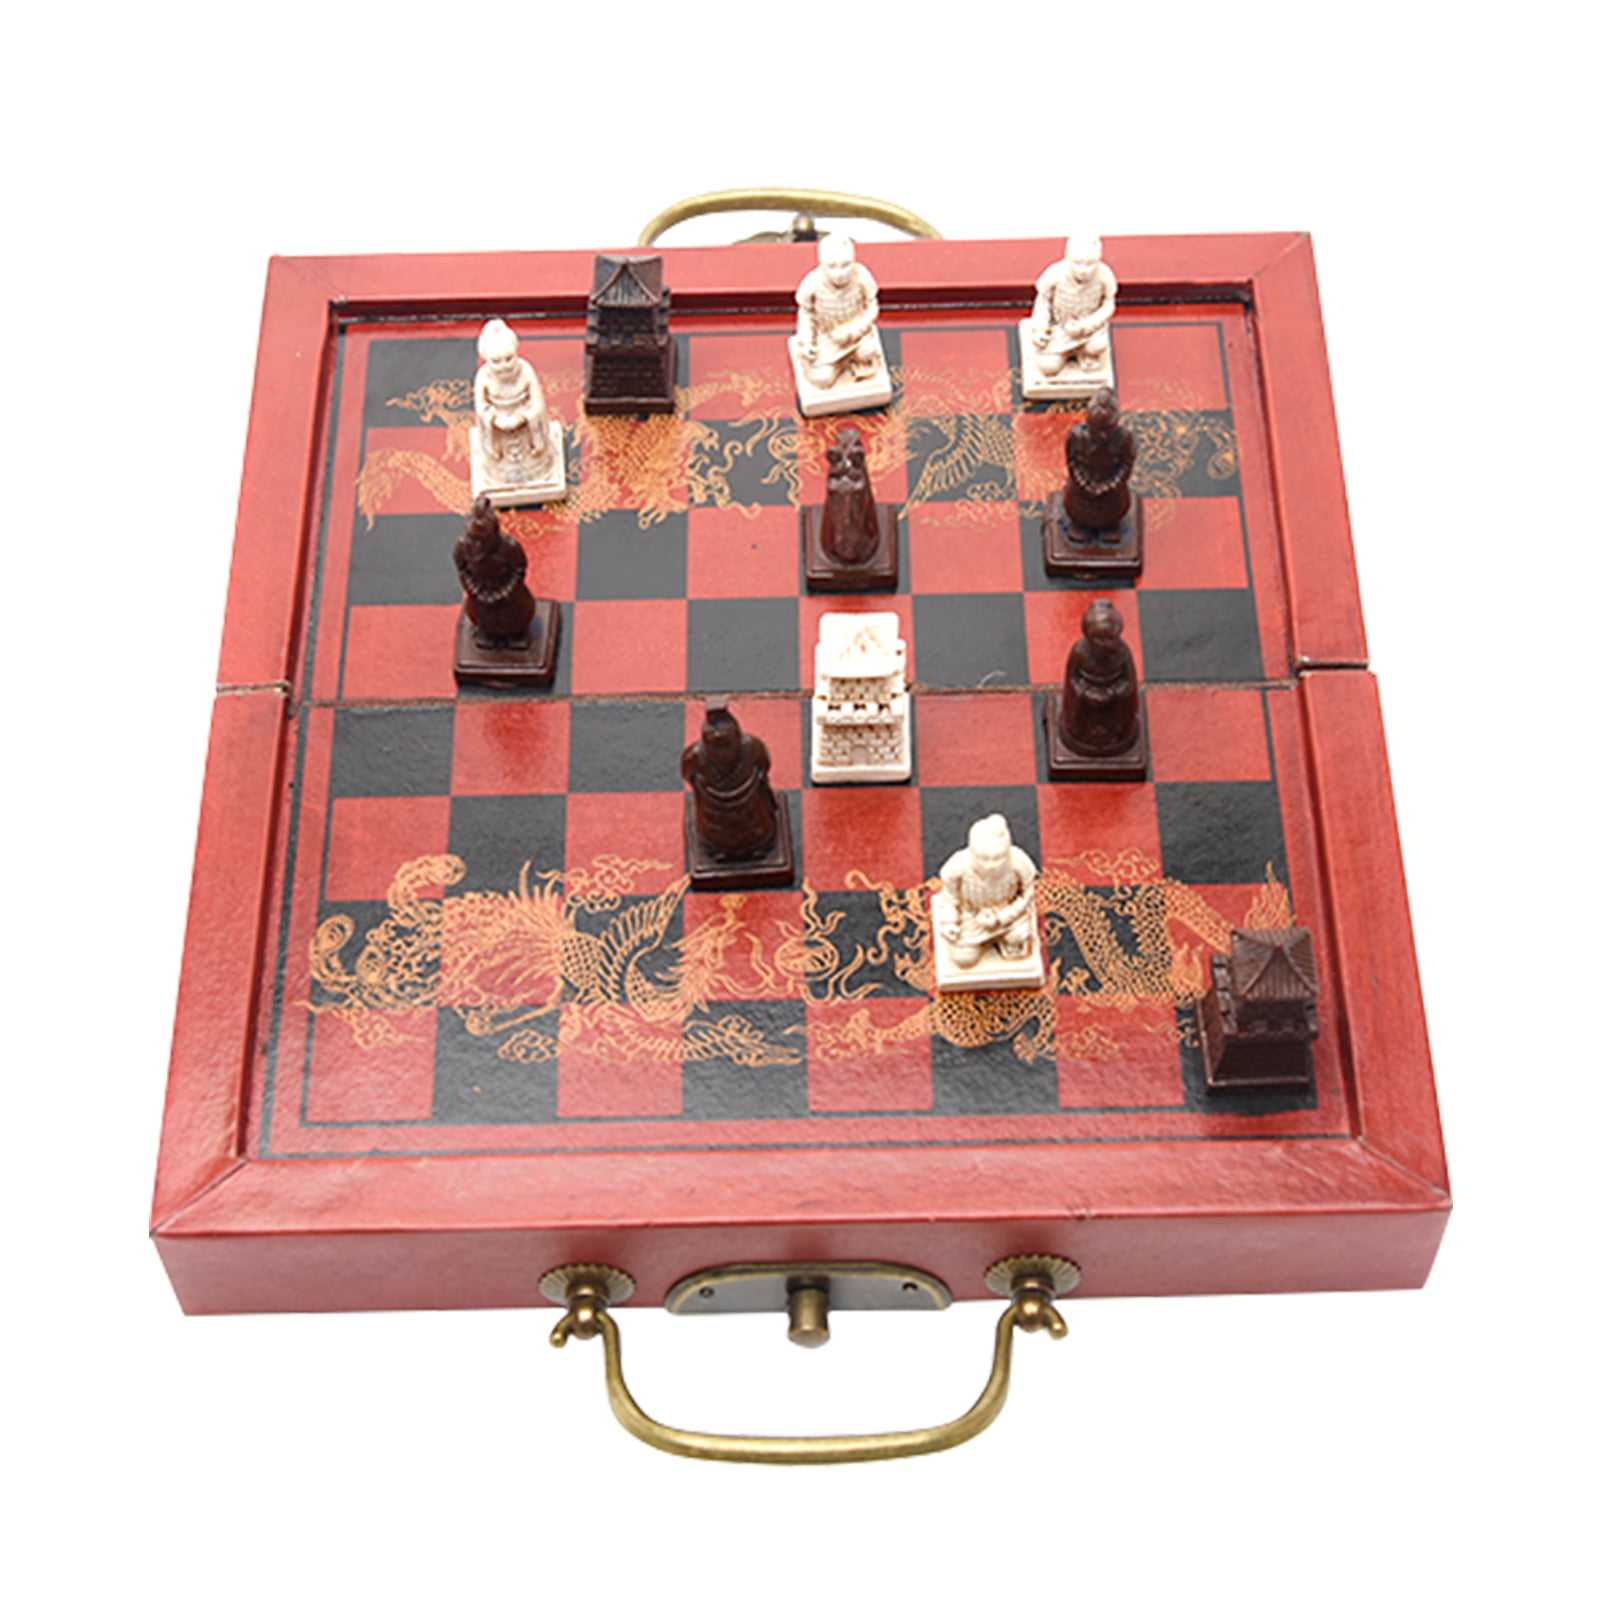 Details about   Wooden Chess Board Travel Folding Chessboard Wood Board Game Home Decor Gift